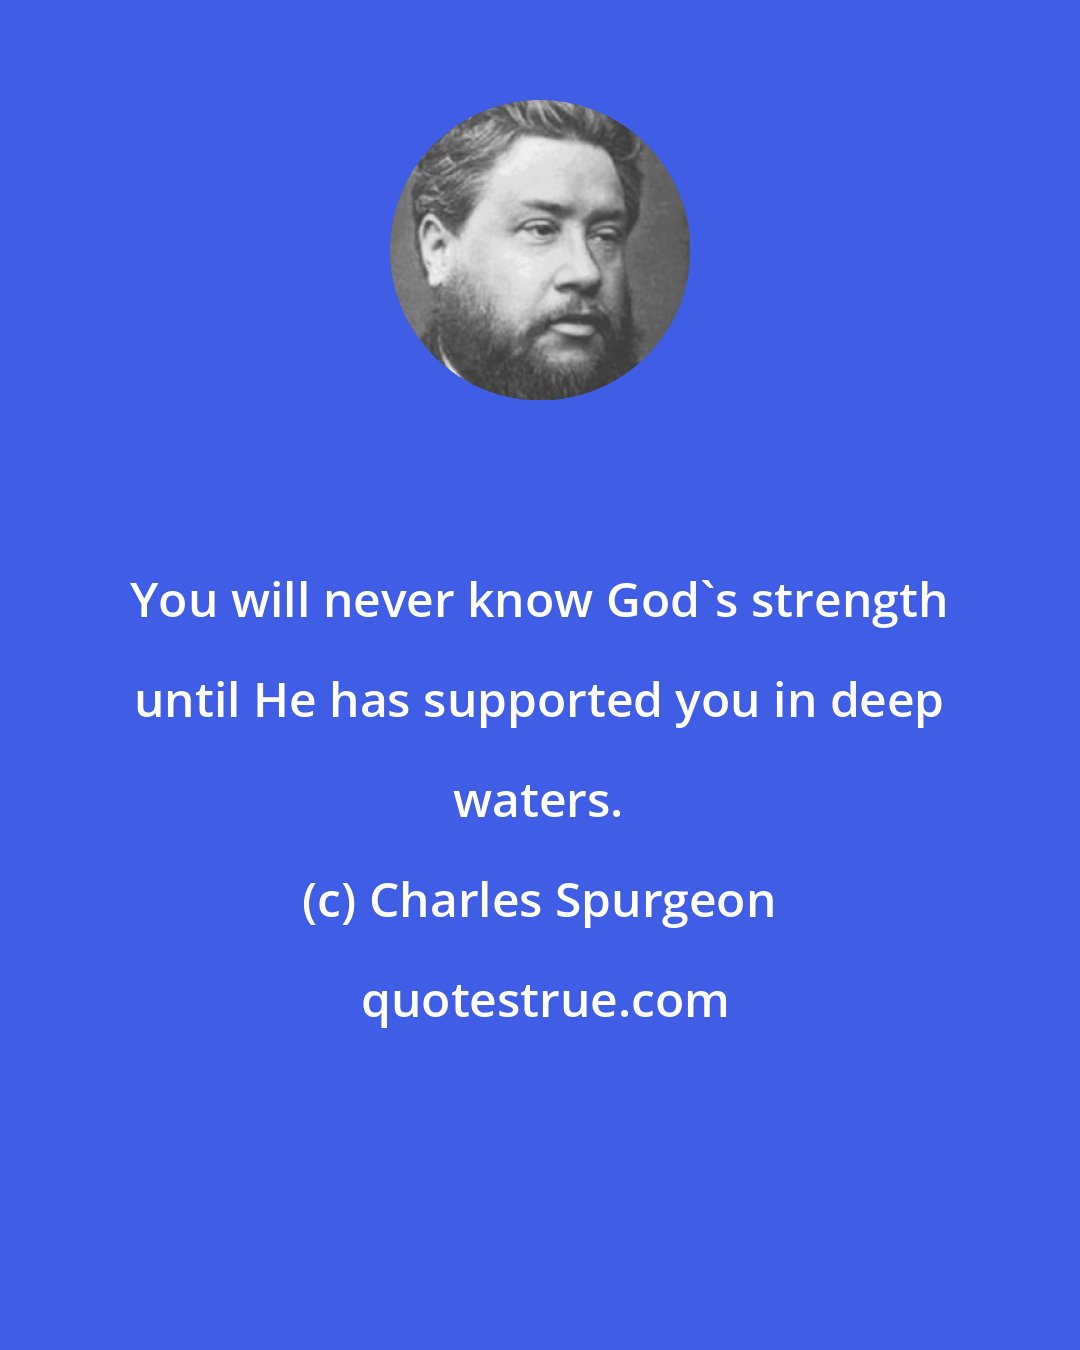 Charles Spurgeon: You will never know God's strength until He has supported you in deep waters.